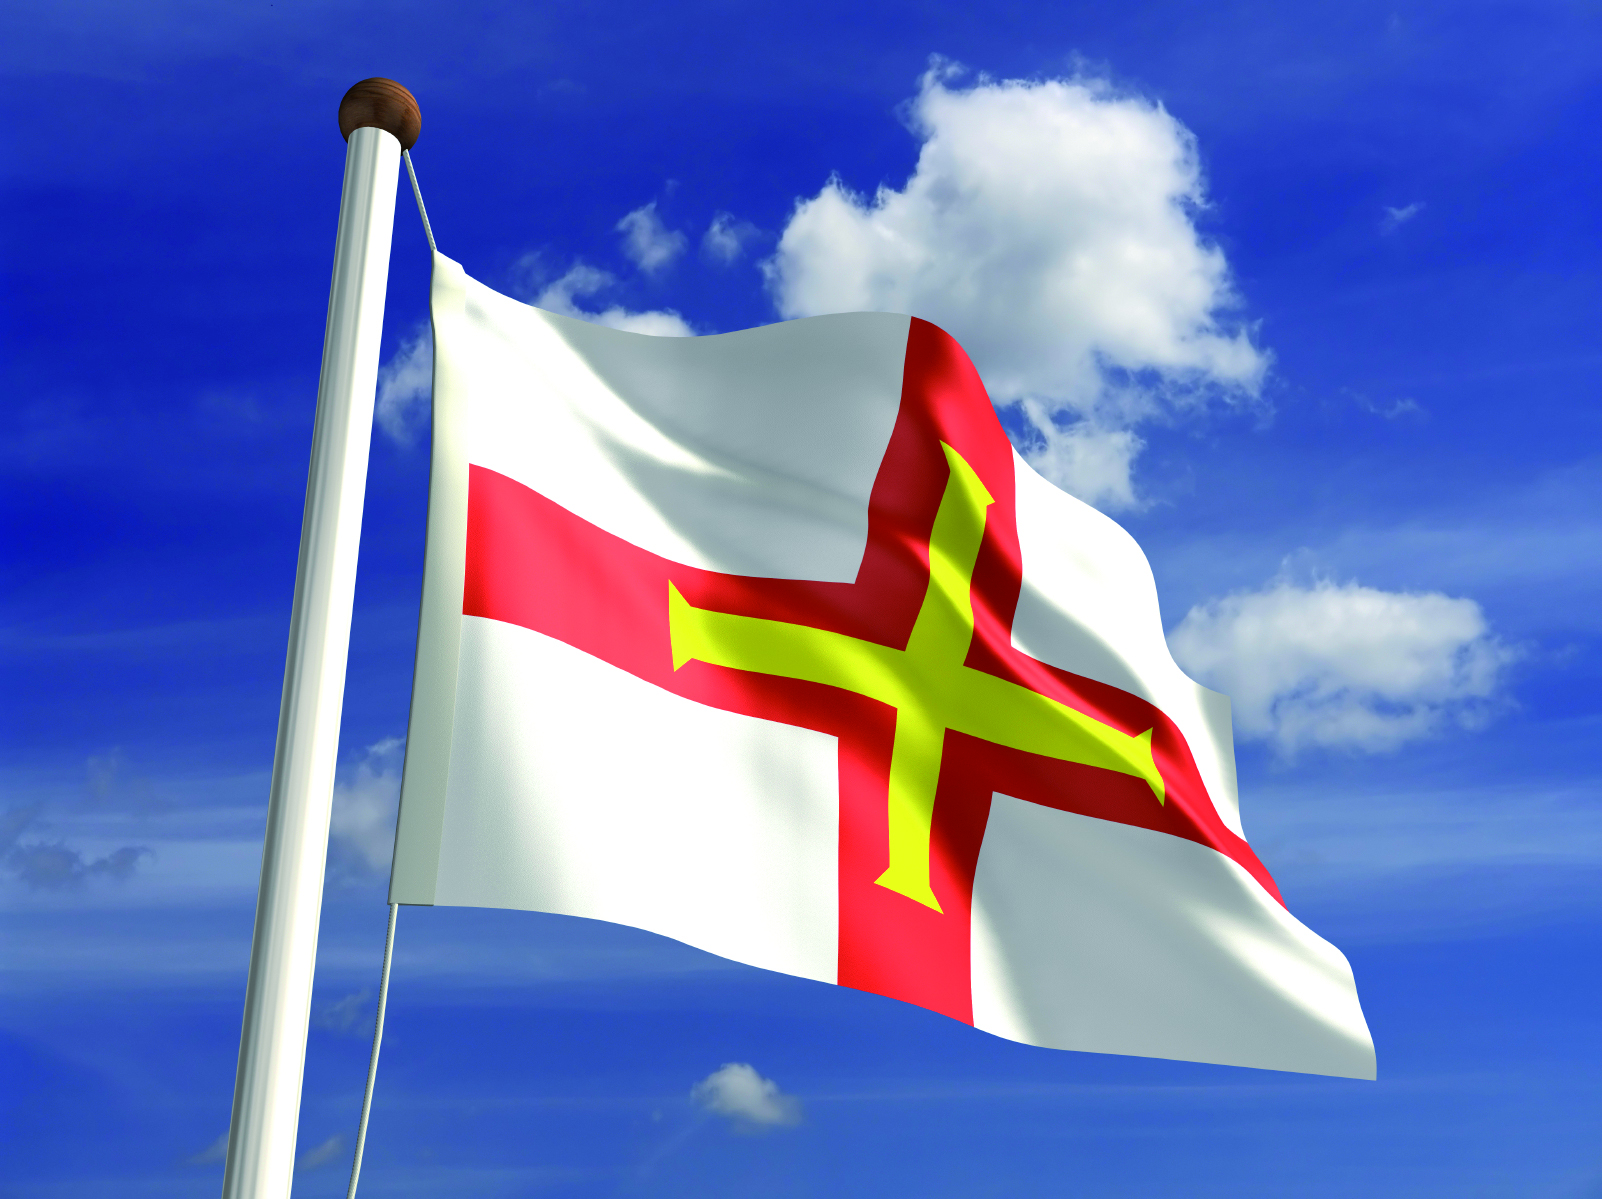 Guernsey wants off tax haven blacklists